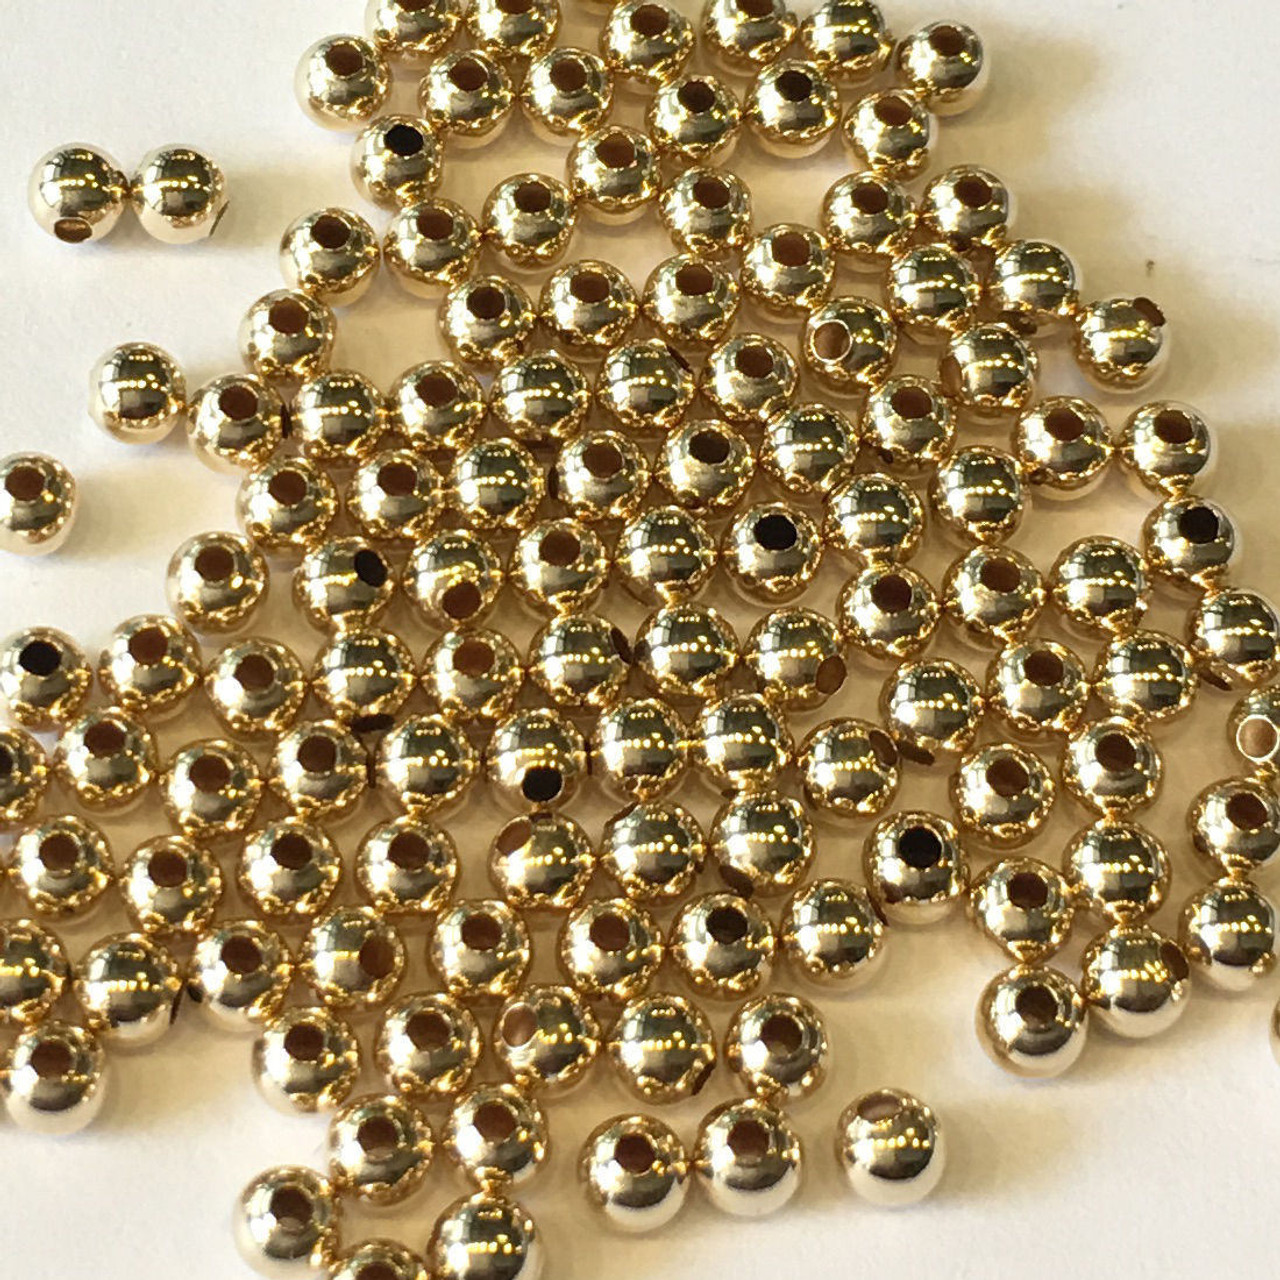 New 24K Yellow Gold Beads 999 Gold Hollow 5mm Round Loose Beads